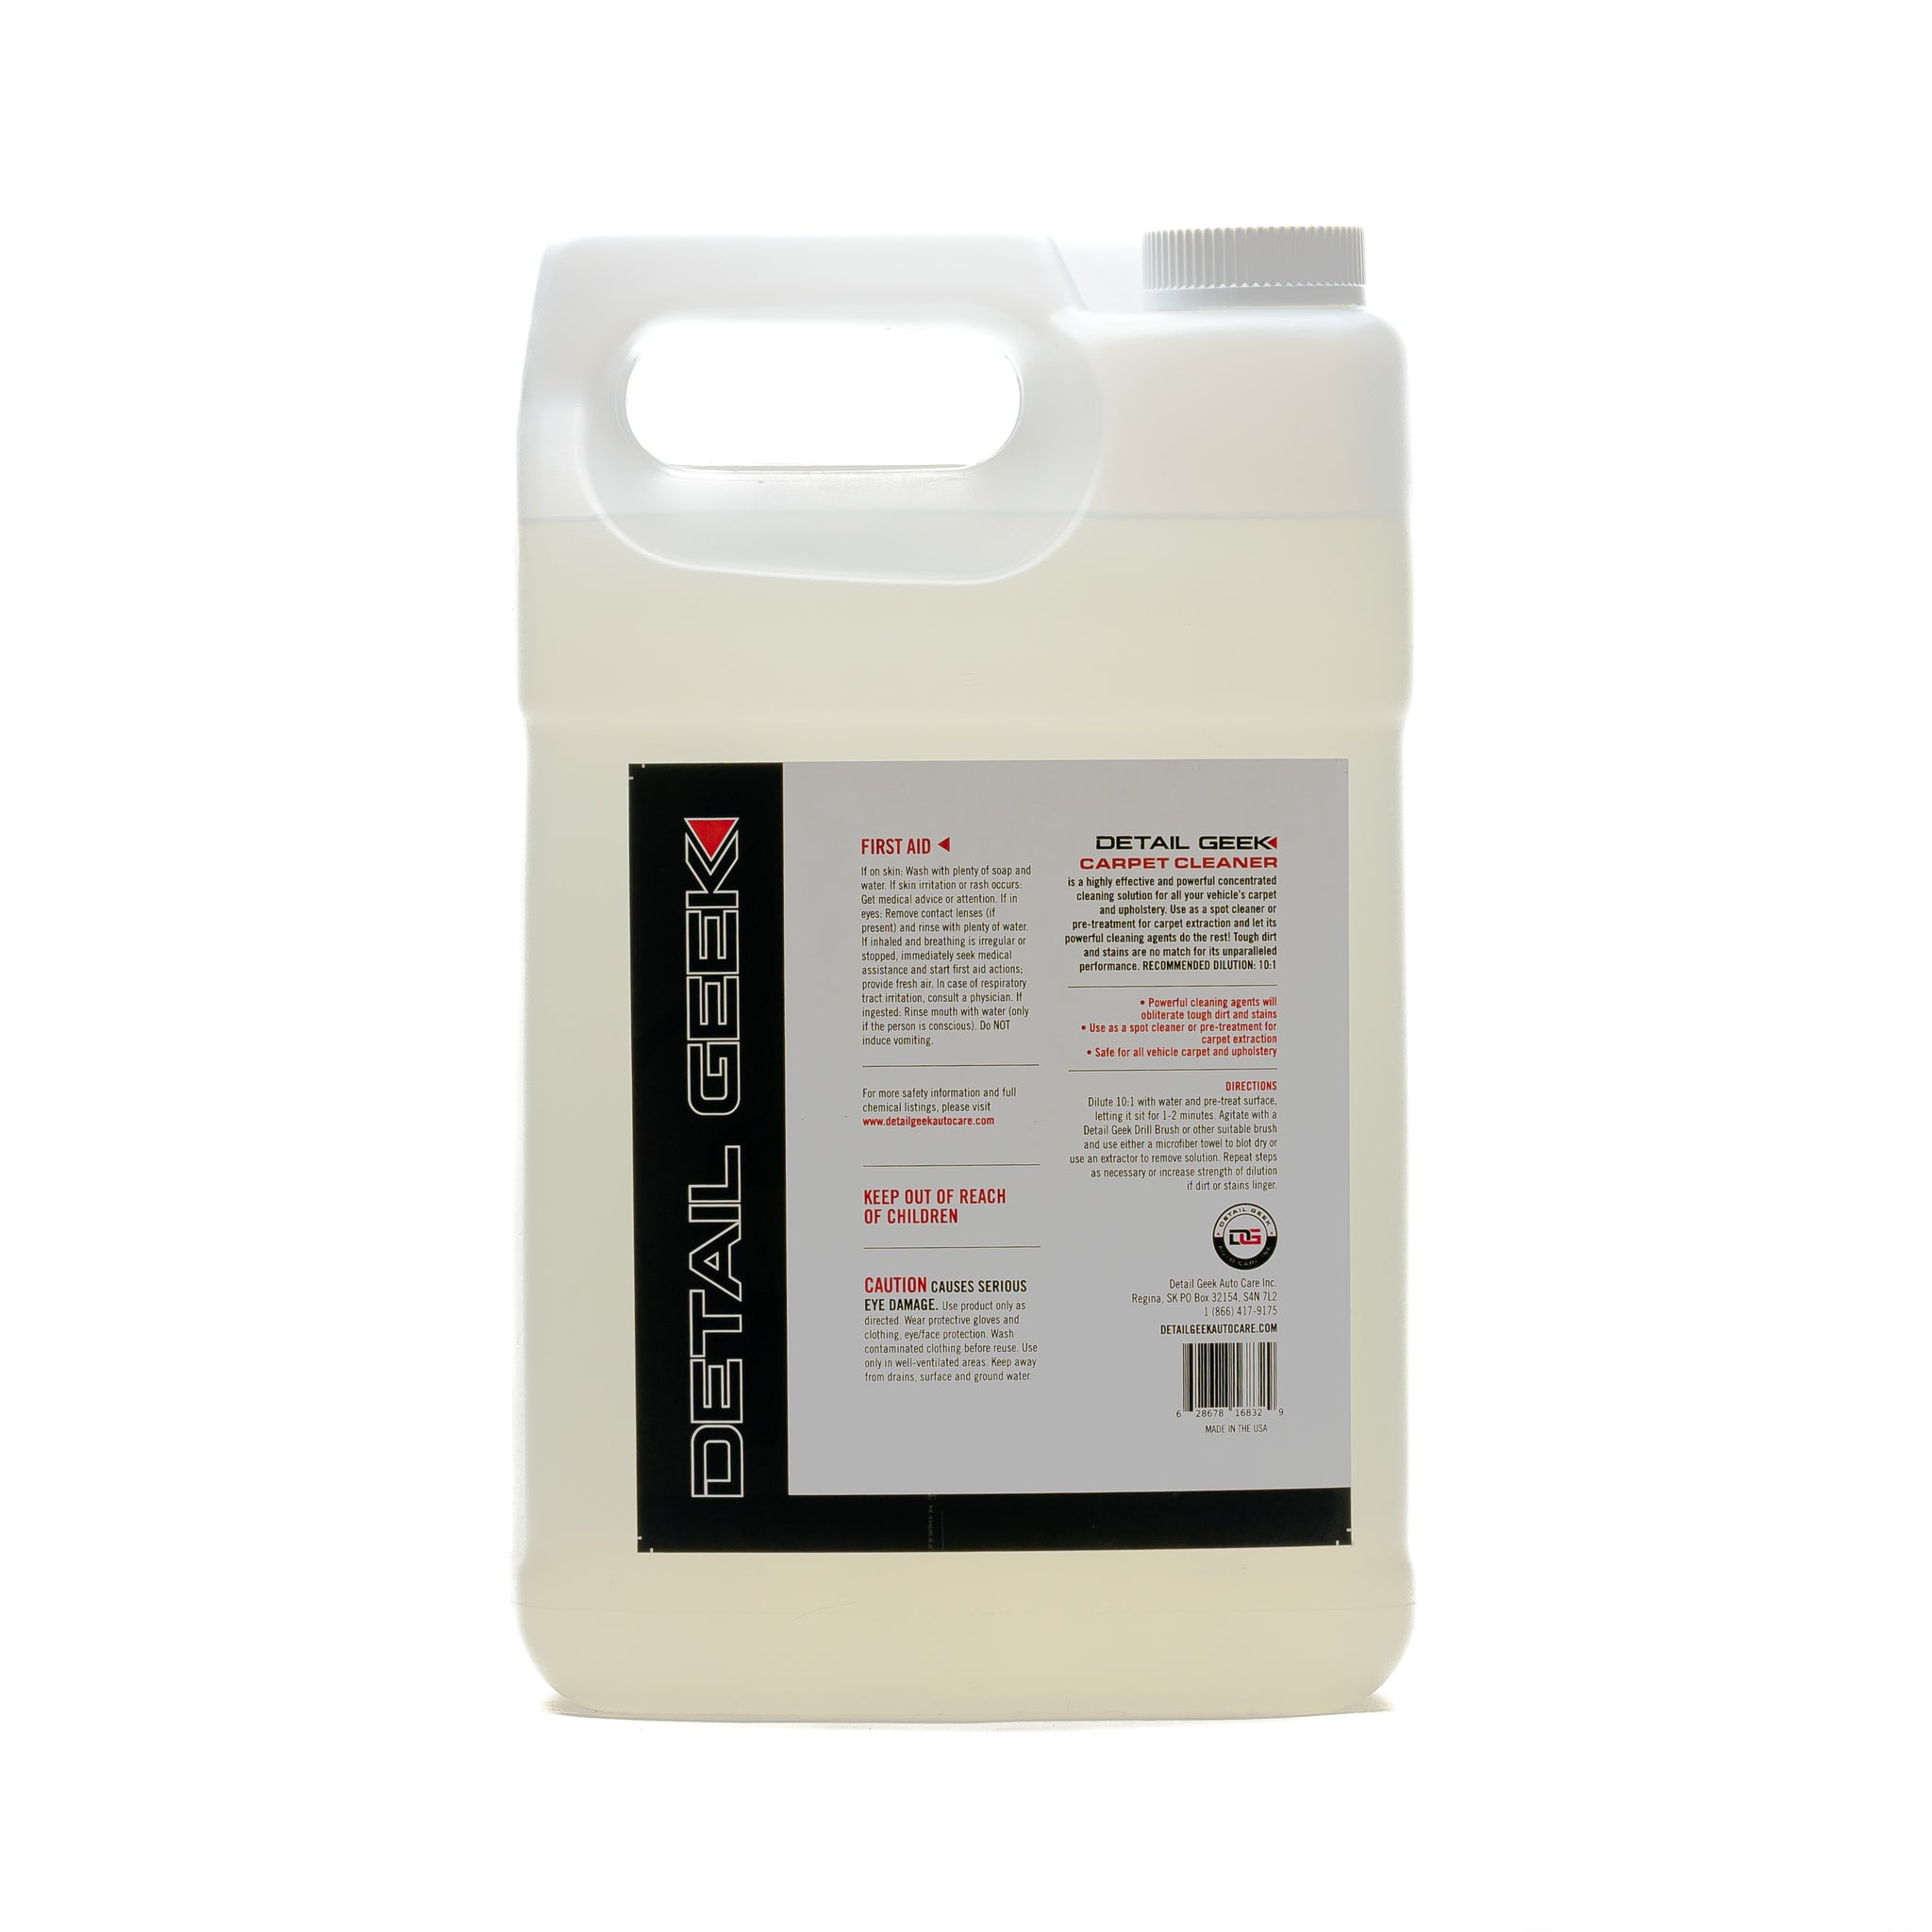 Auto Car Upholstery Cleaner - Spot Solution, Inc